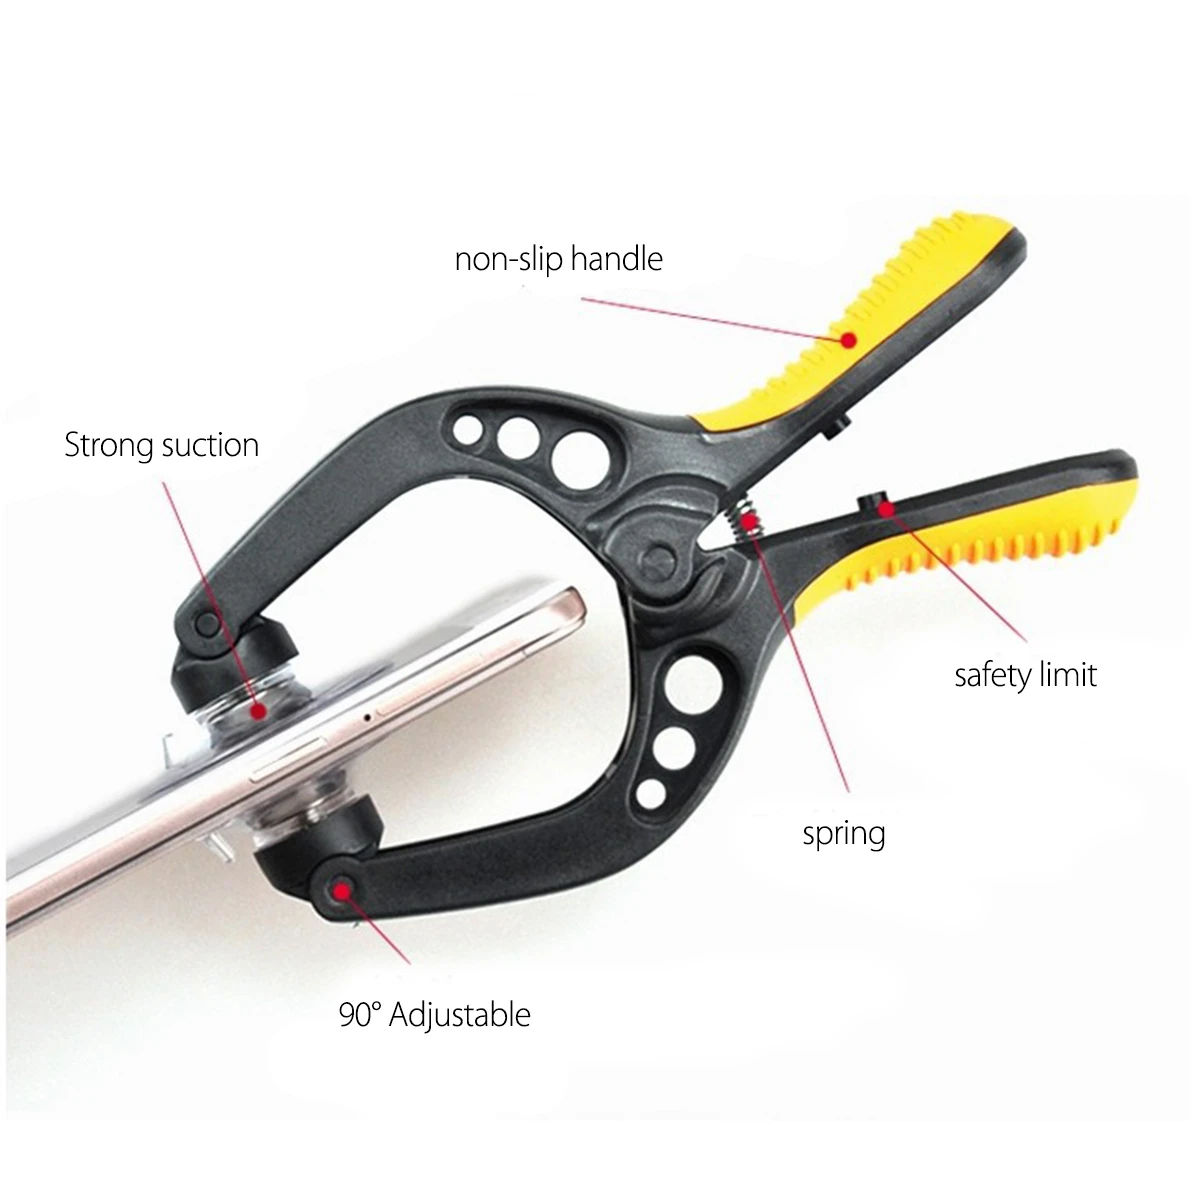 LCD Screen Opening Pliers Repair Tool with Super Strong Suction Cup Platform for Cell Phone